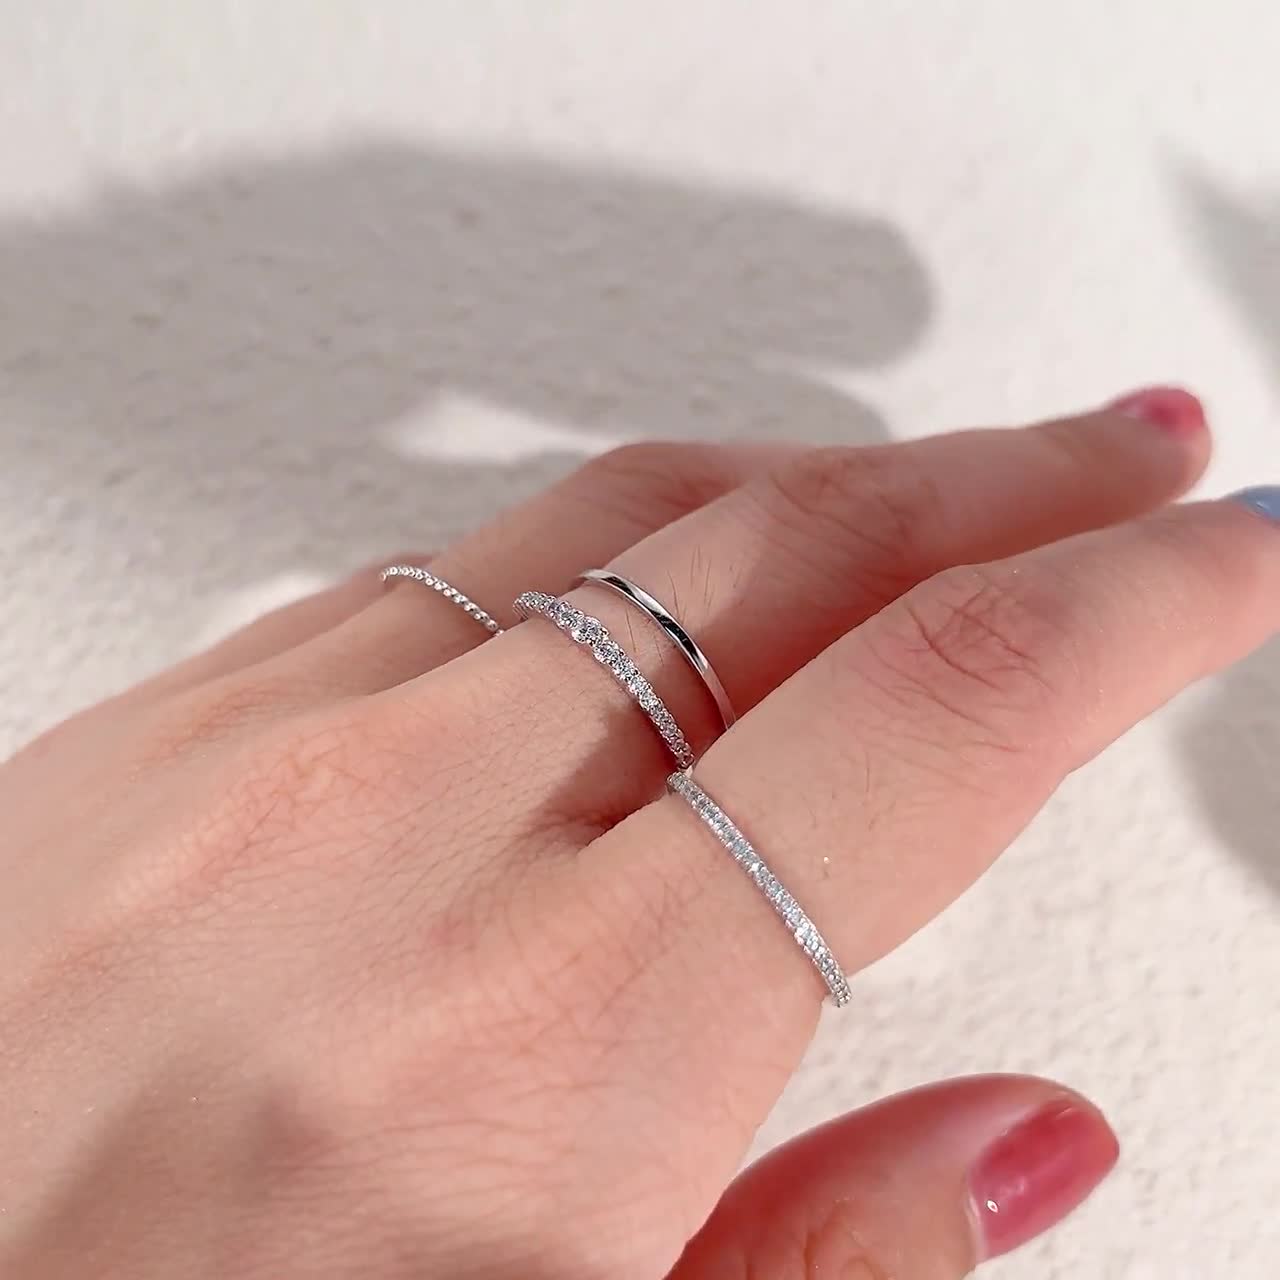 Stackable Ring Set of Thin Stacking Silver Sterling Simple Ring Delicate Rings Gold 925 Diamond of Thin Mixed Ultra Minimalist Etsy Dainty 4, - Set